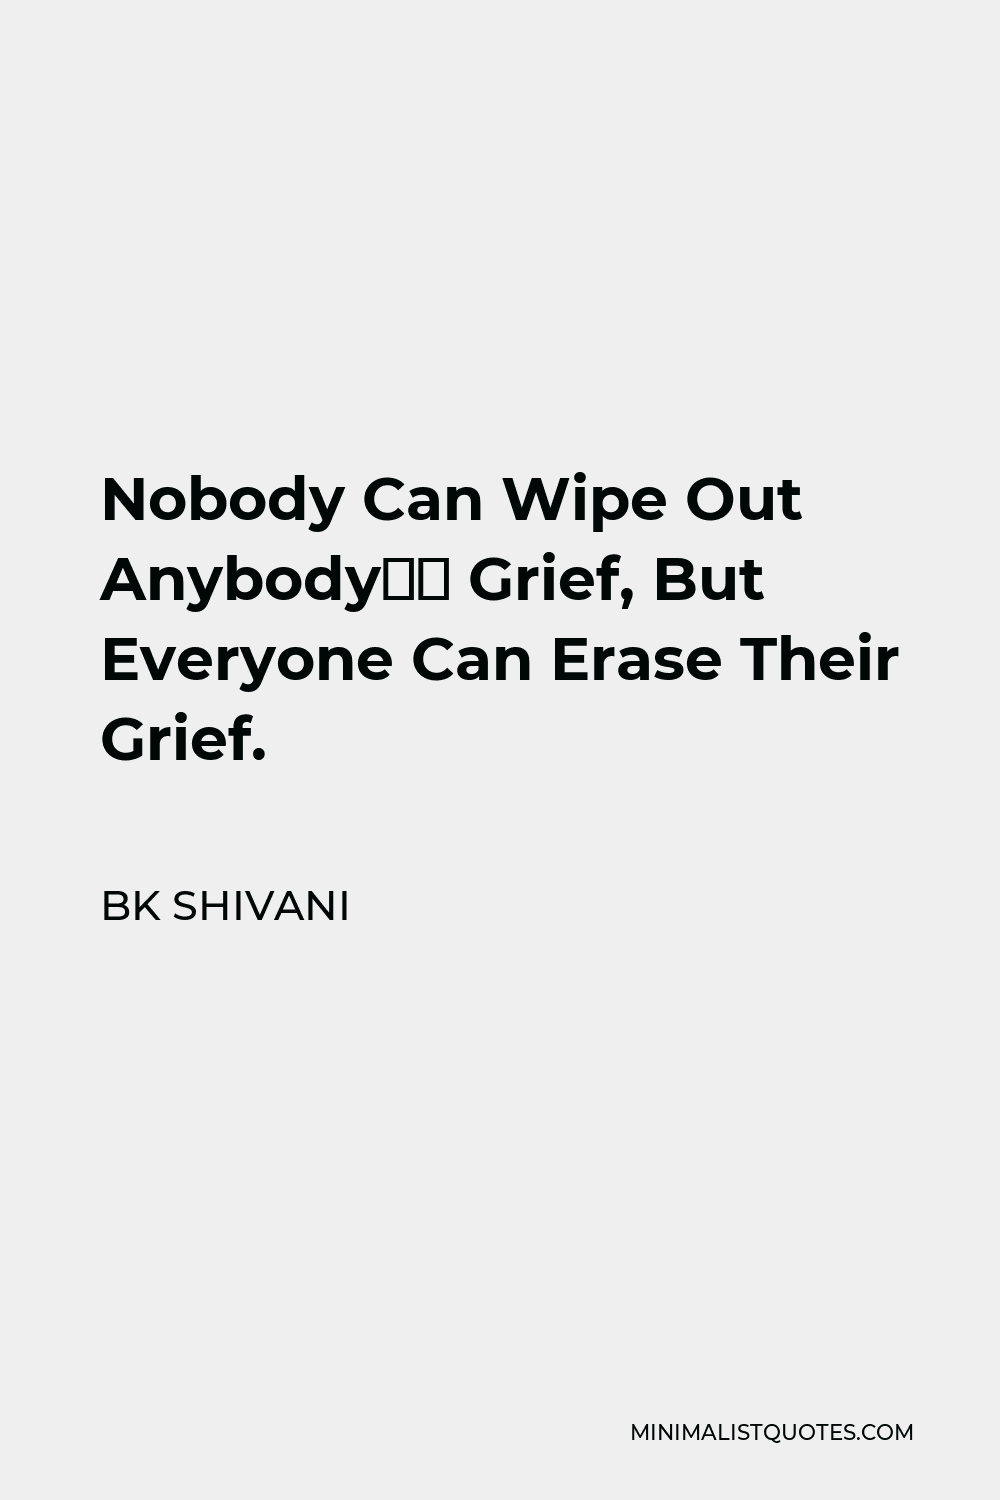 BK Shivani Quote - Nobody Can Wipe Out Anybody’s Grief, But Everyone Can Erase Their Grief.